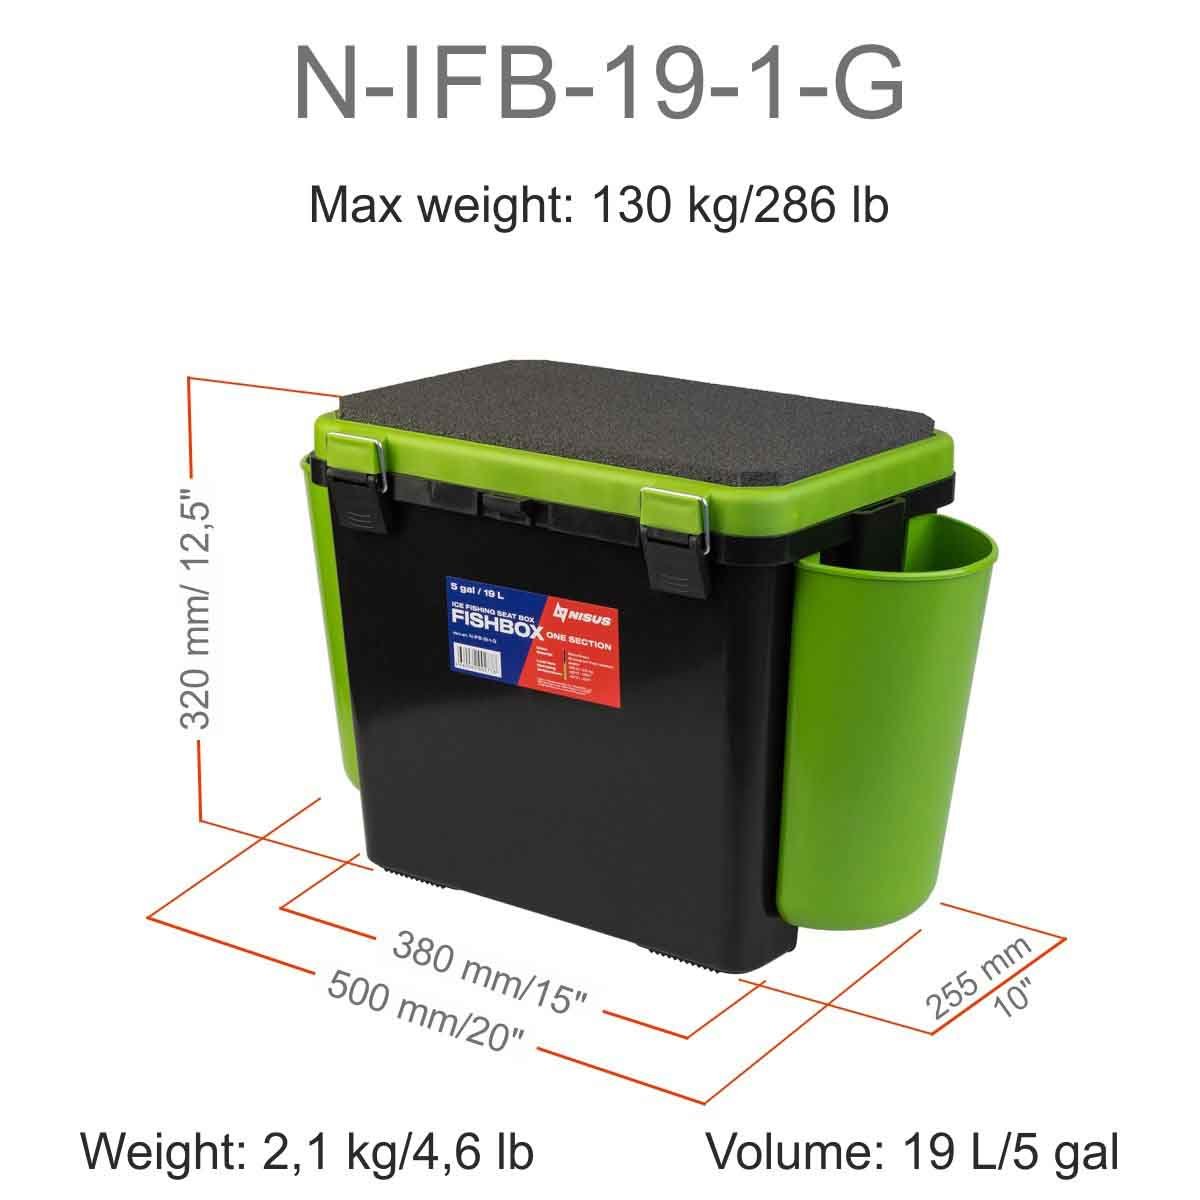 FishBox Large 5 gal Box for Ice Fishing with Seat could carry up to 286 pounds, it is 12.5 inches high, 20 inches long and 10 inches wide, weighing 4.6 lbs